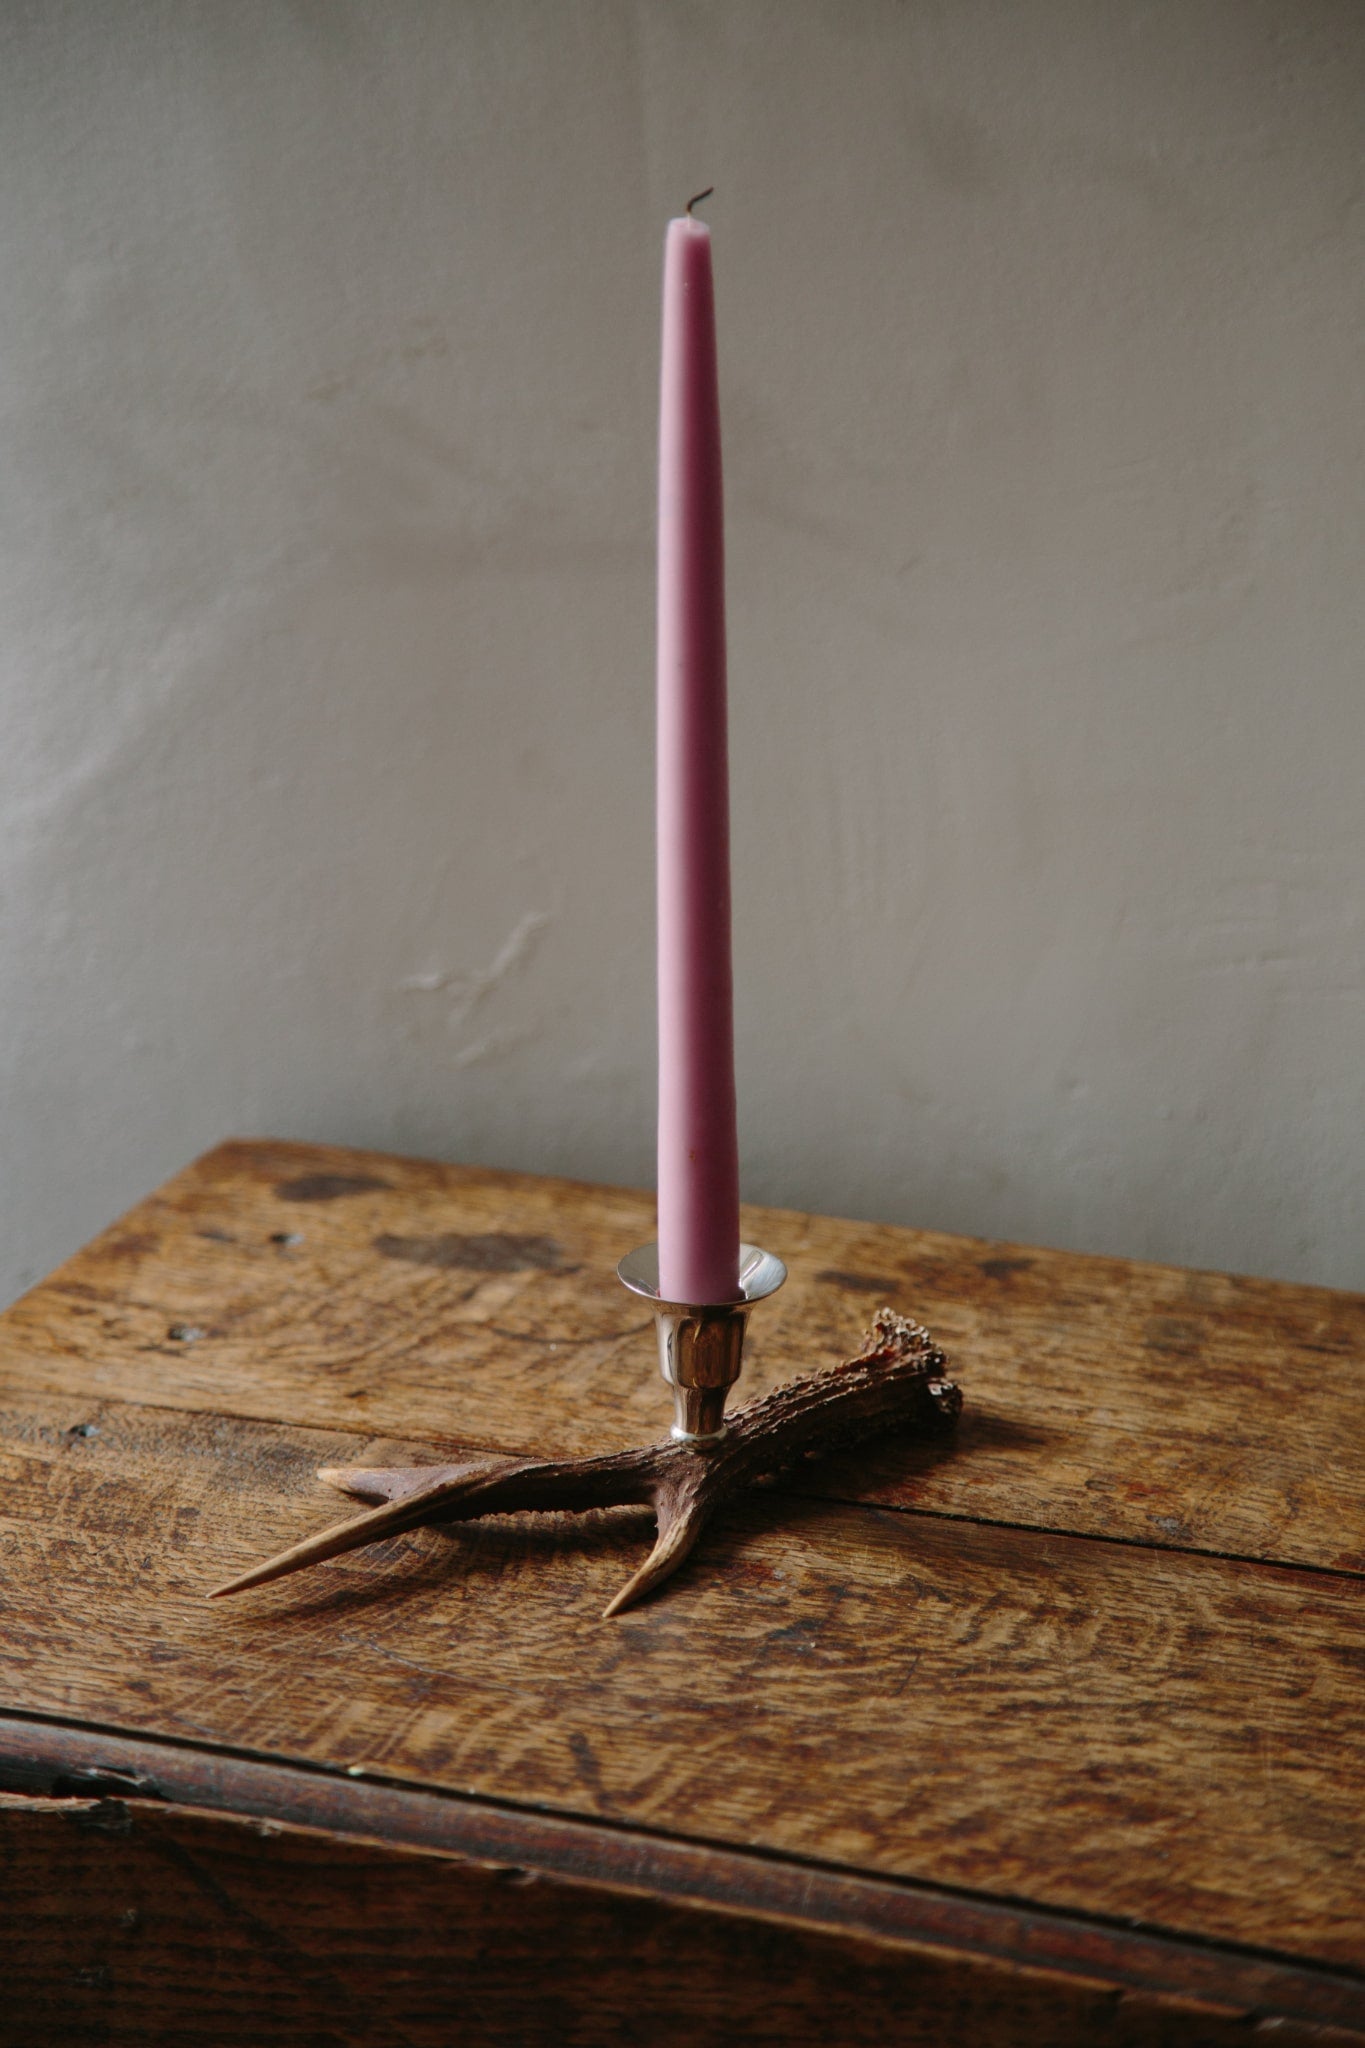 A singular candlestick holder made from a roe deer antler. Styled with a lilac pink candle which has recently been blown out.